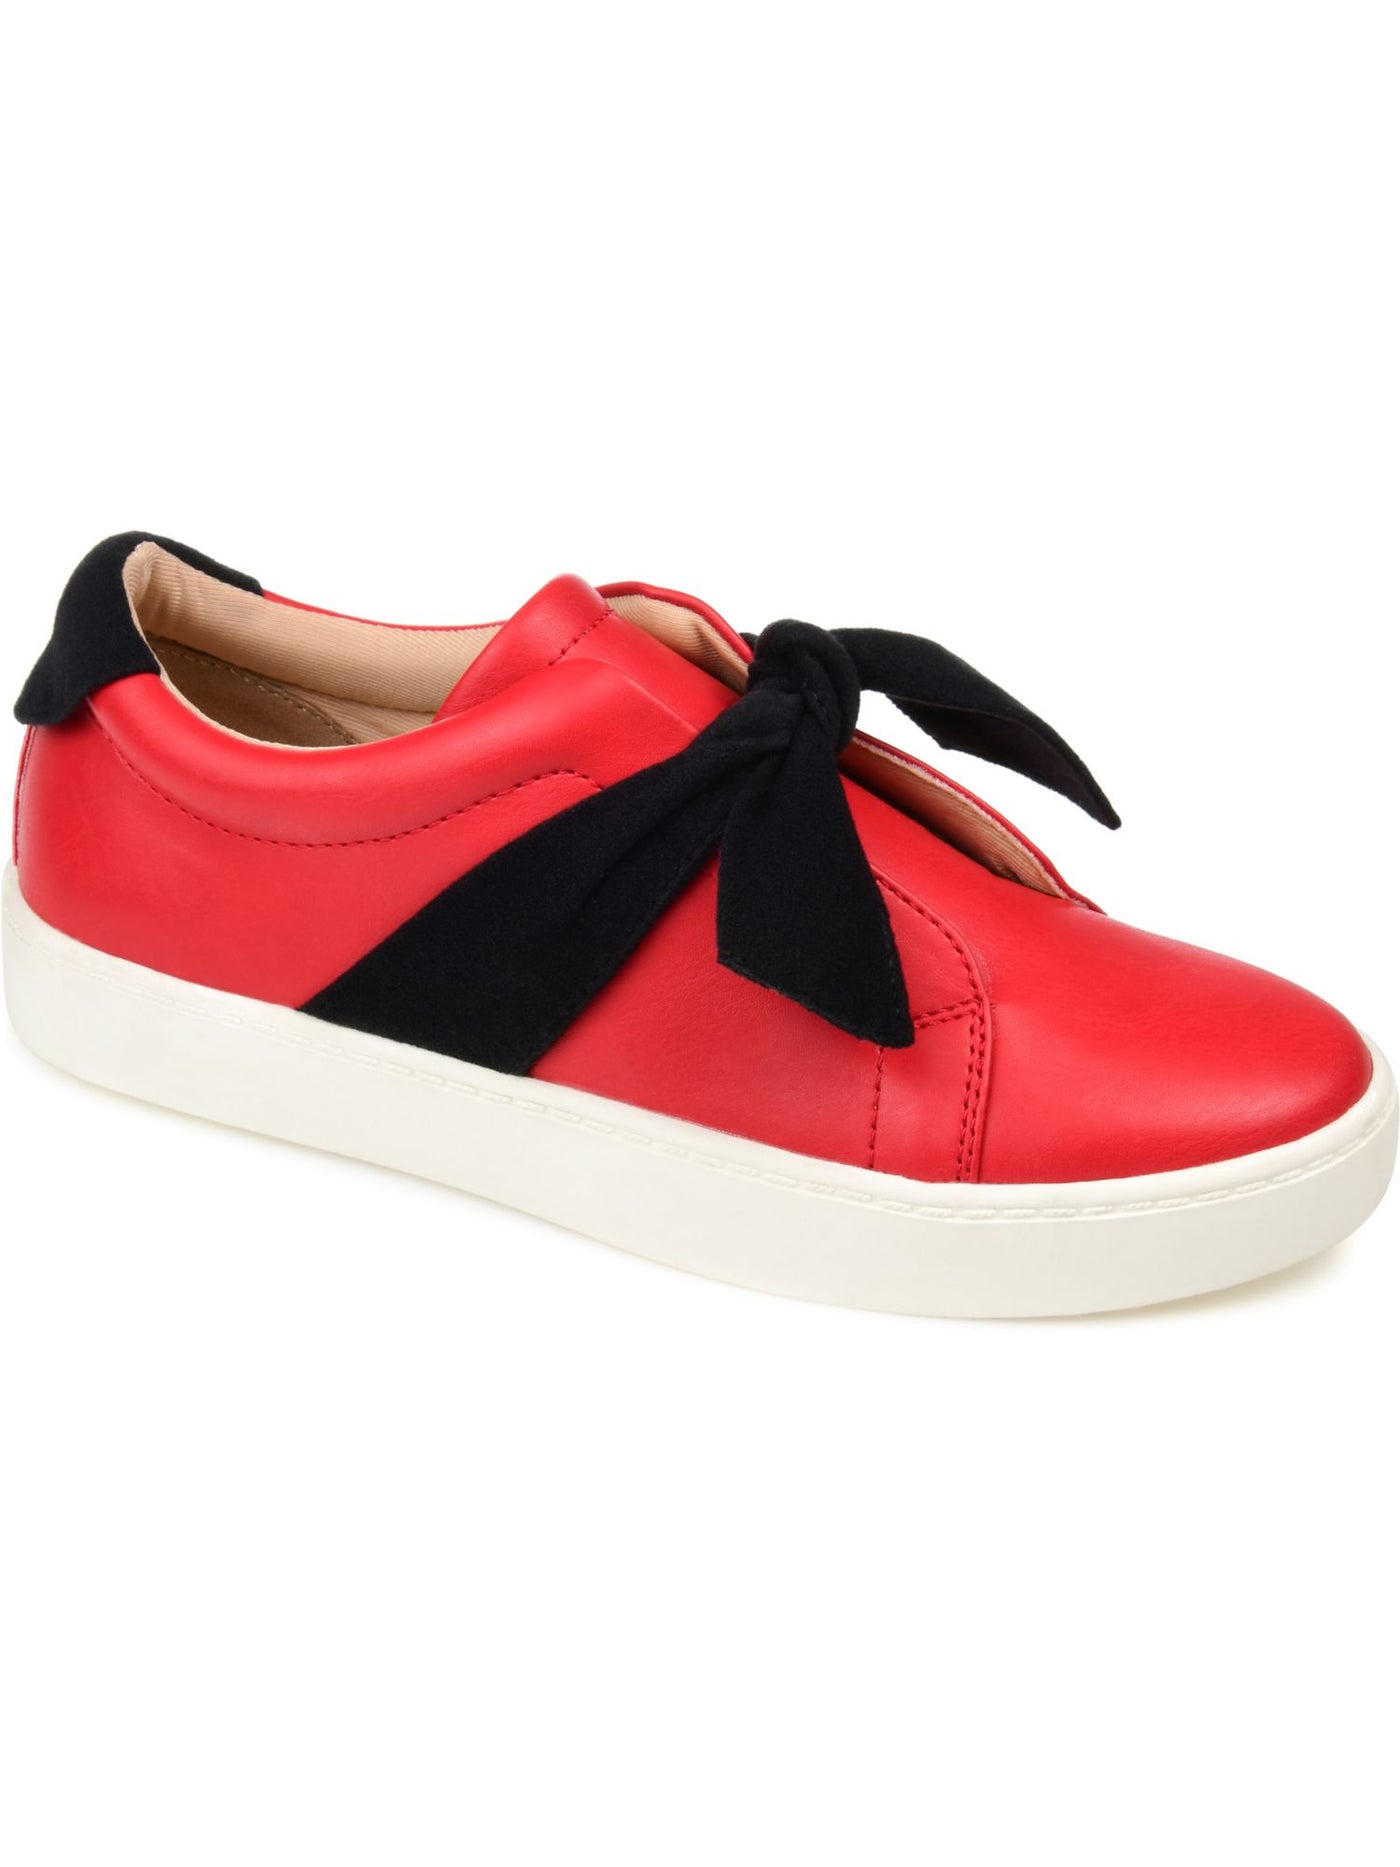 JOURNEE COLLECTION Womens Red Removable Insole Goring Cushioned Bow Accent Abrina Almond Toe Platform Slip On Sneakers Shoes 7.5